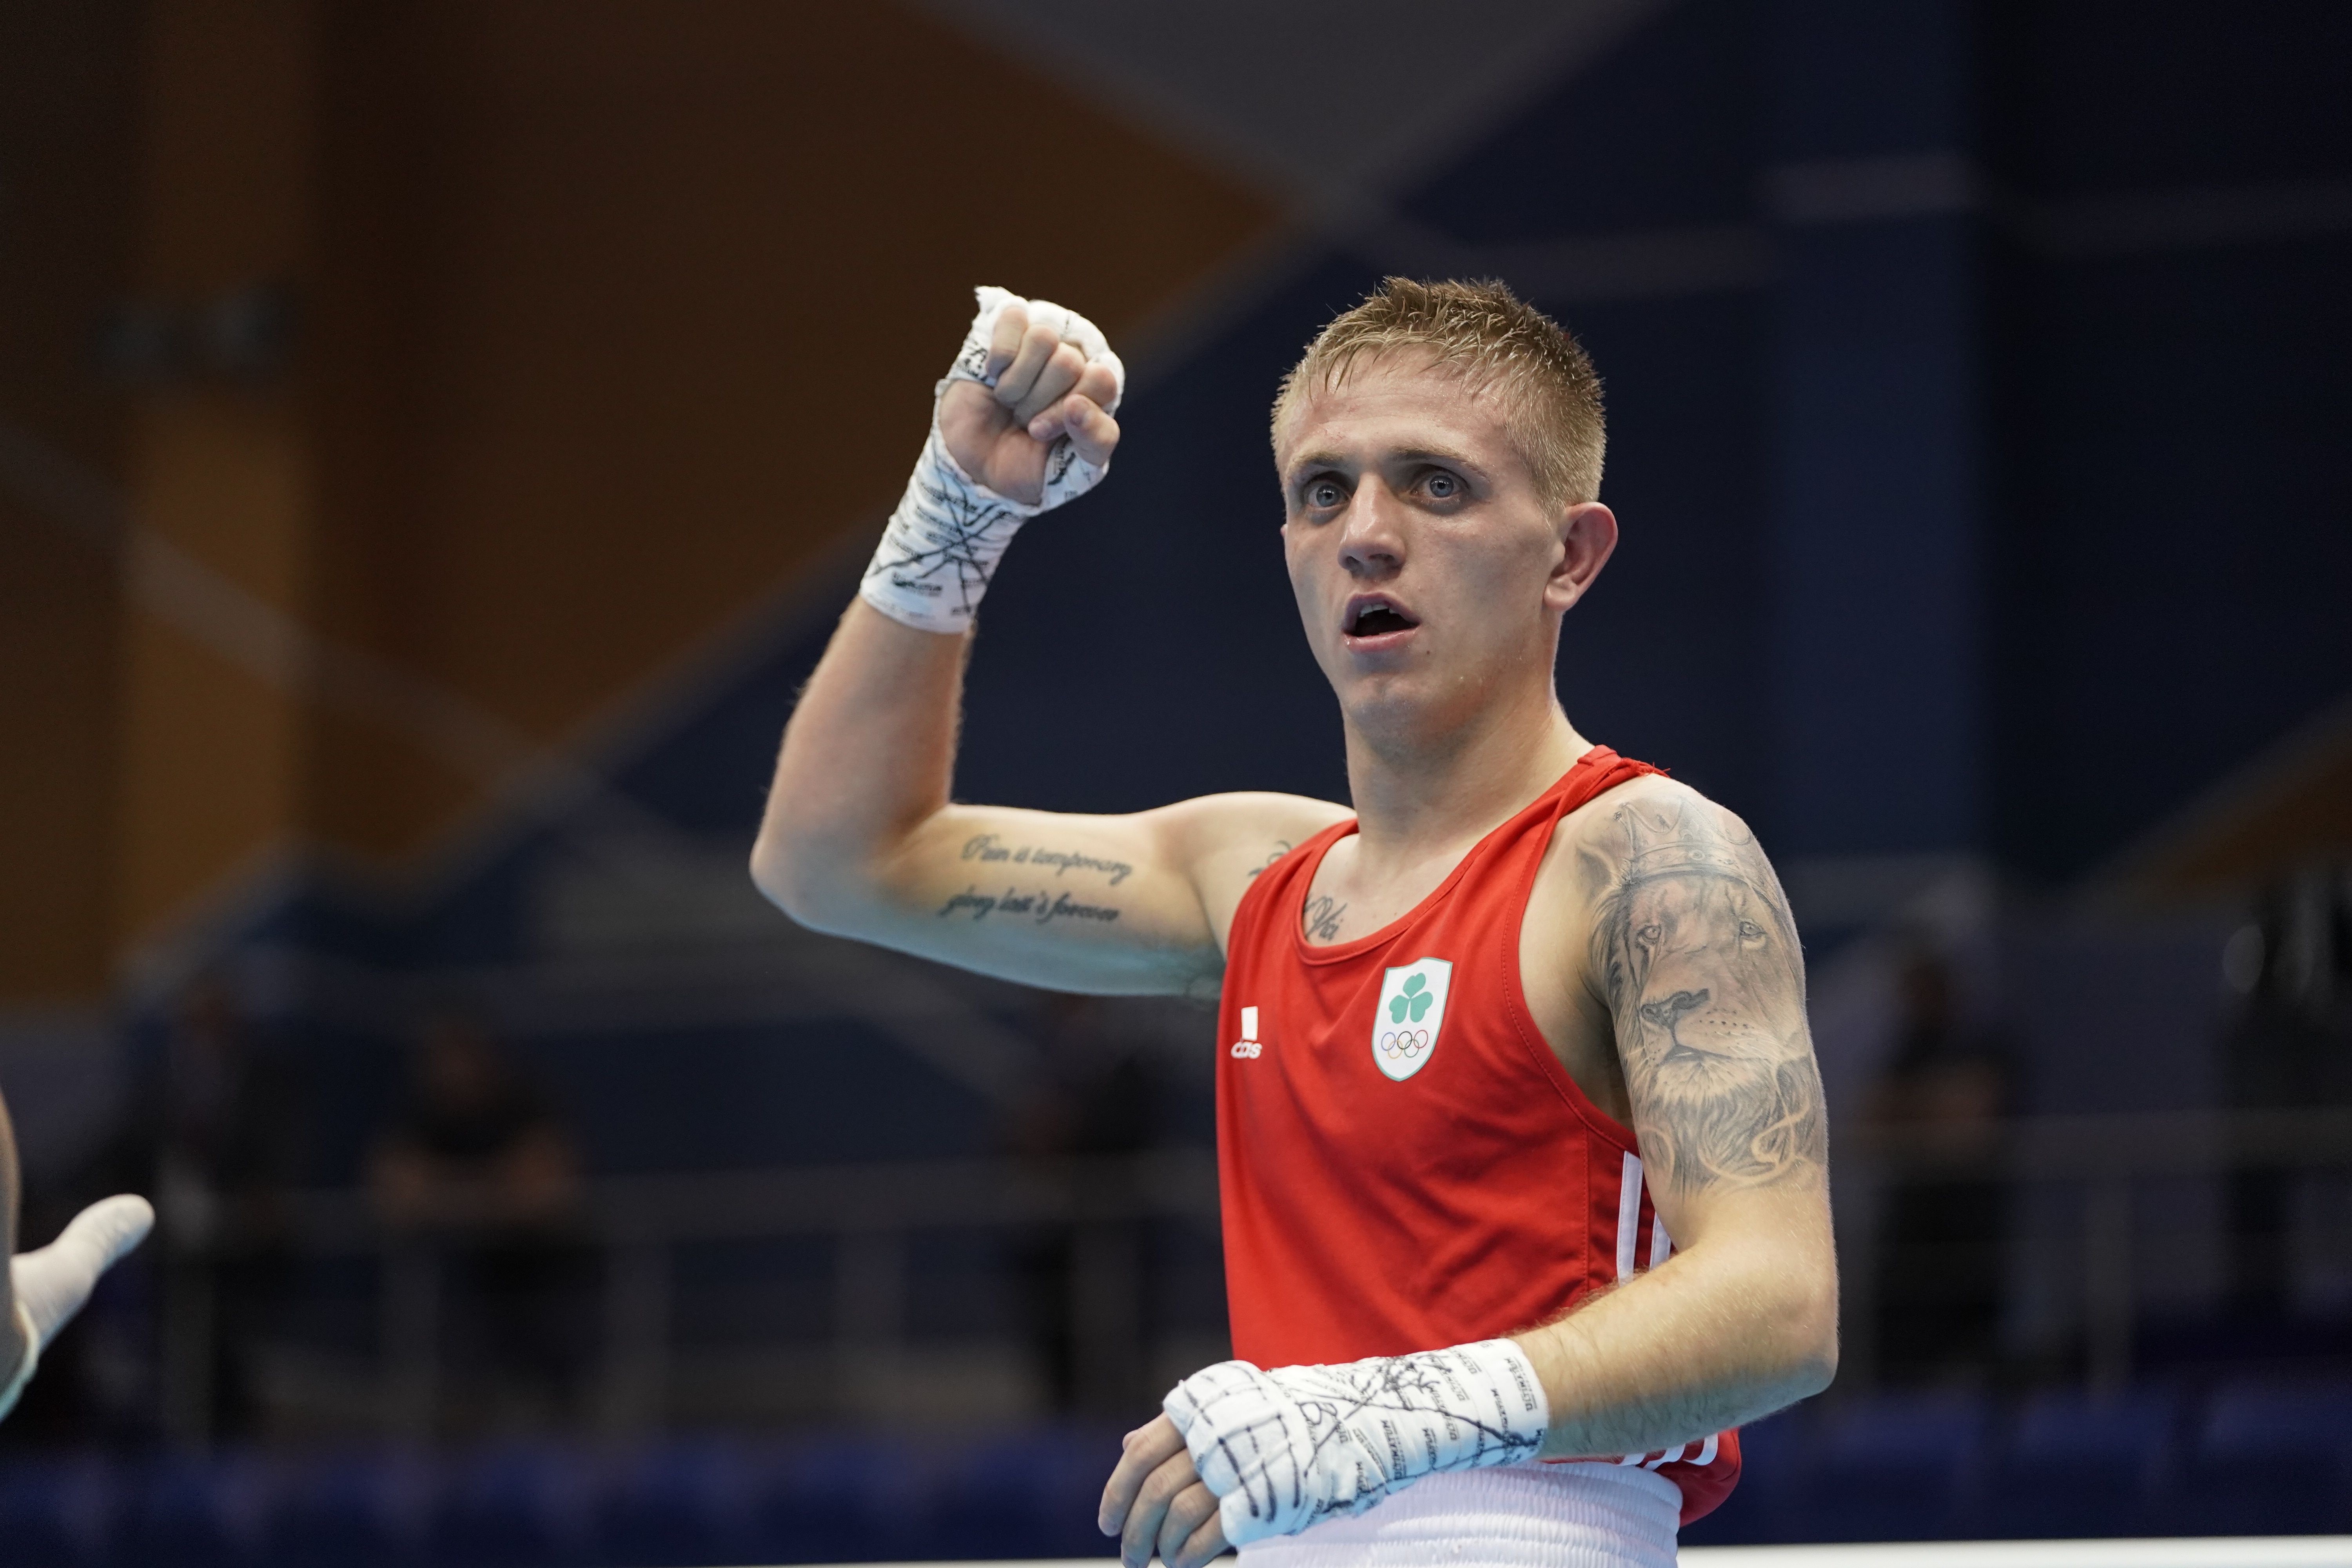 Kurt Walker will be in action at 4am Irish time tomorrow (Saturday) to face Spain\'s Jose Quiles in the first round of the men\'s featherweight division